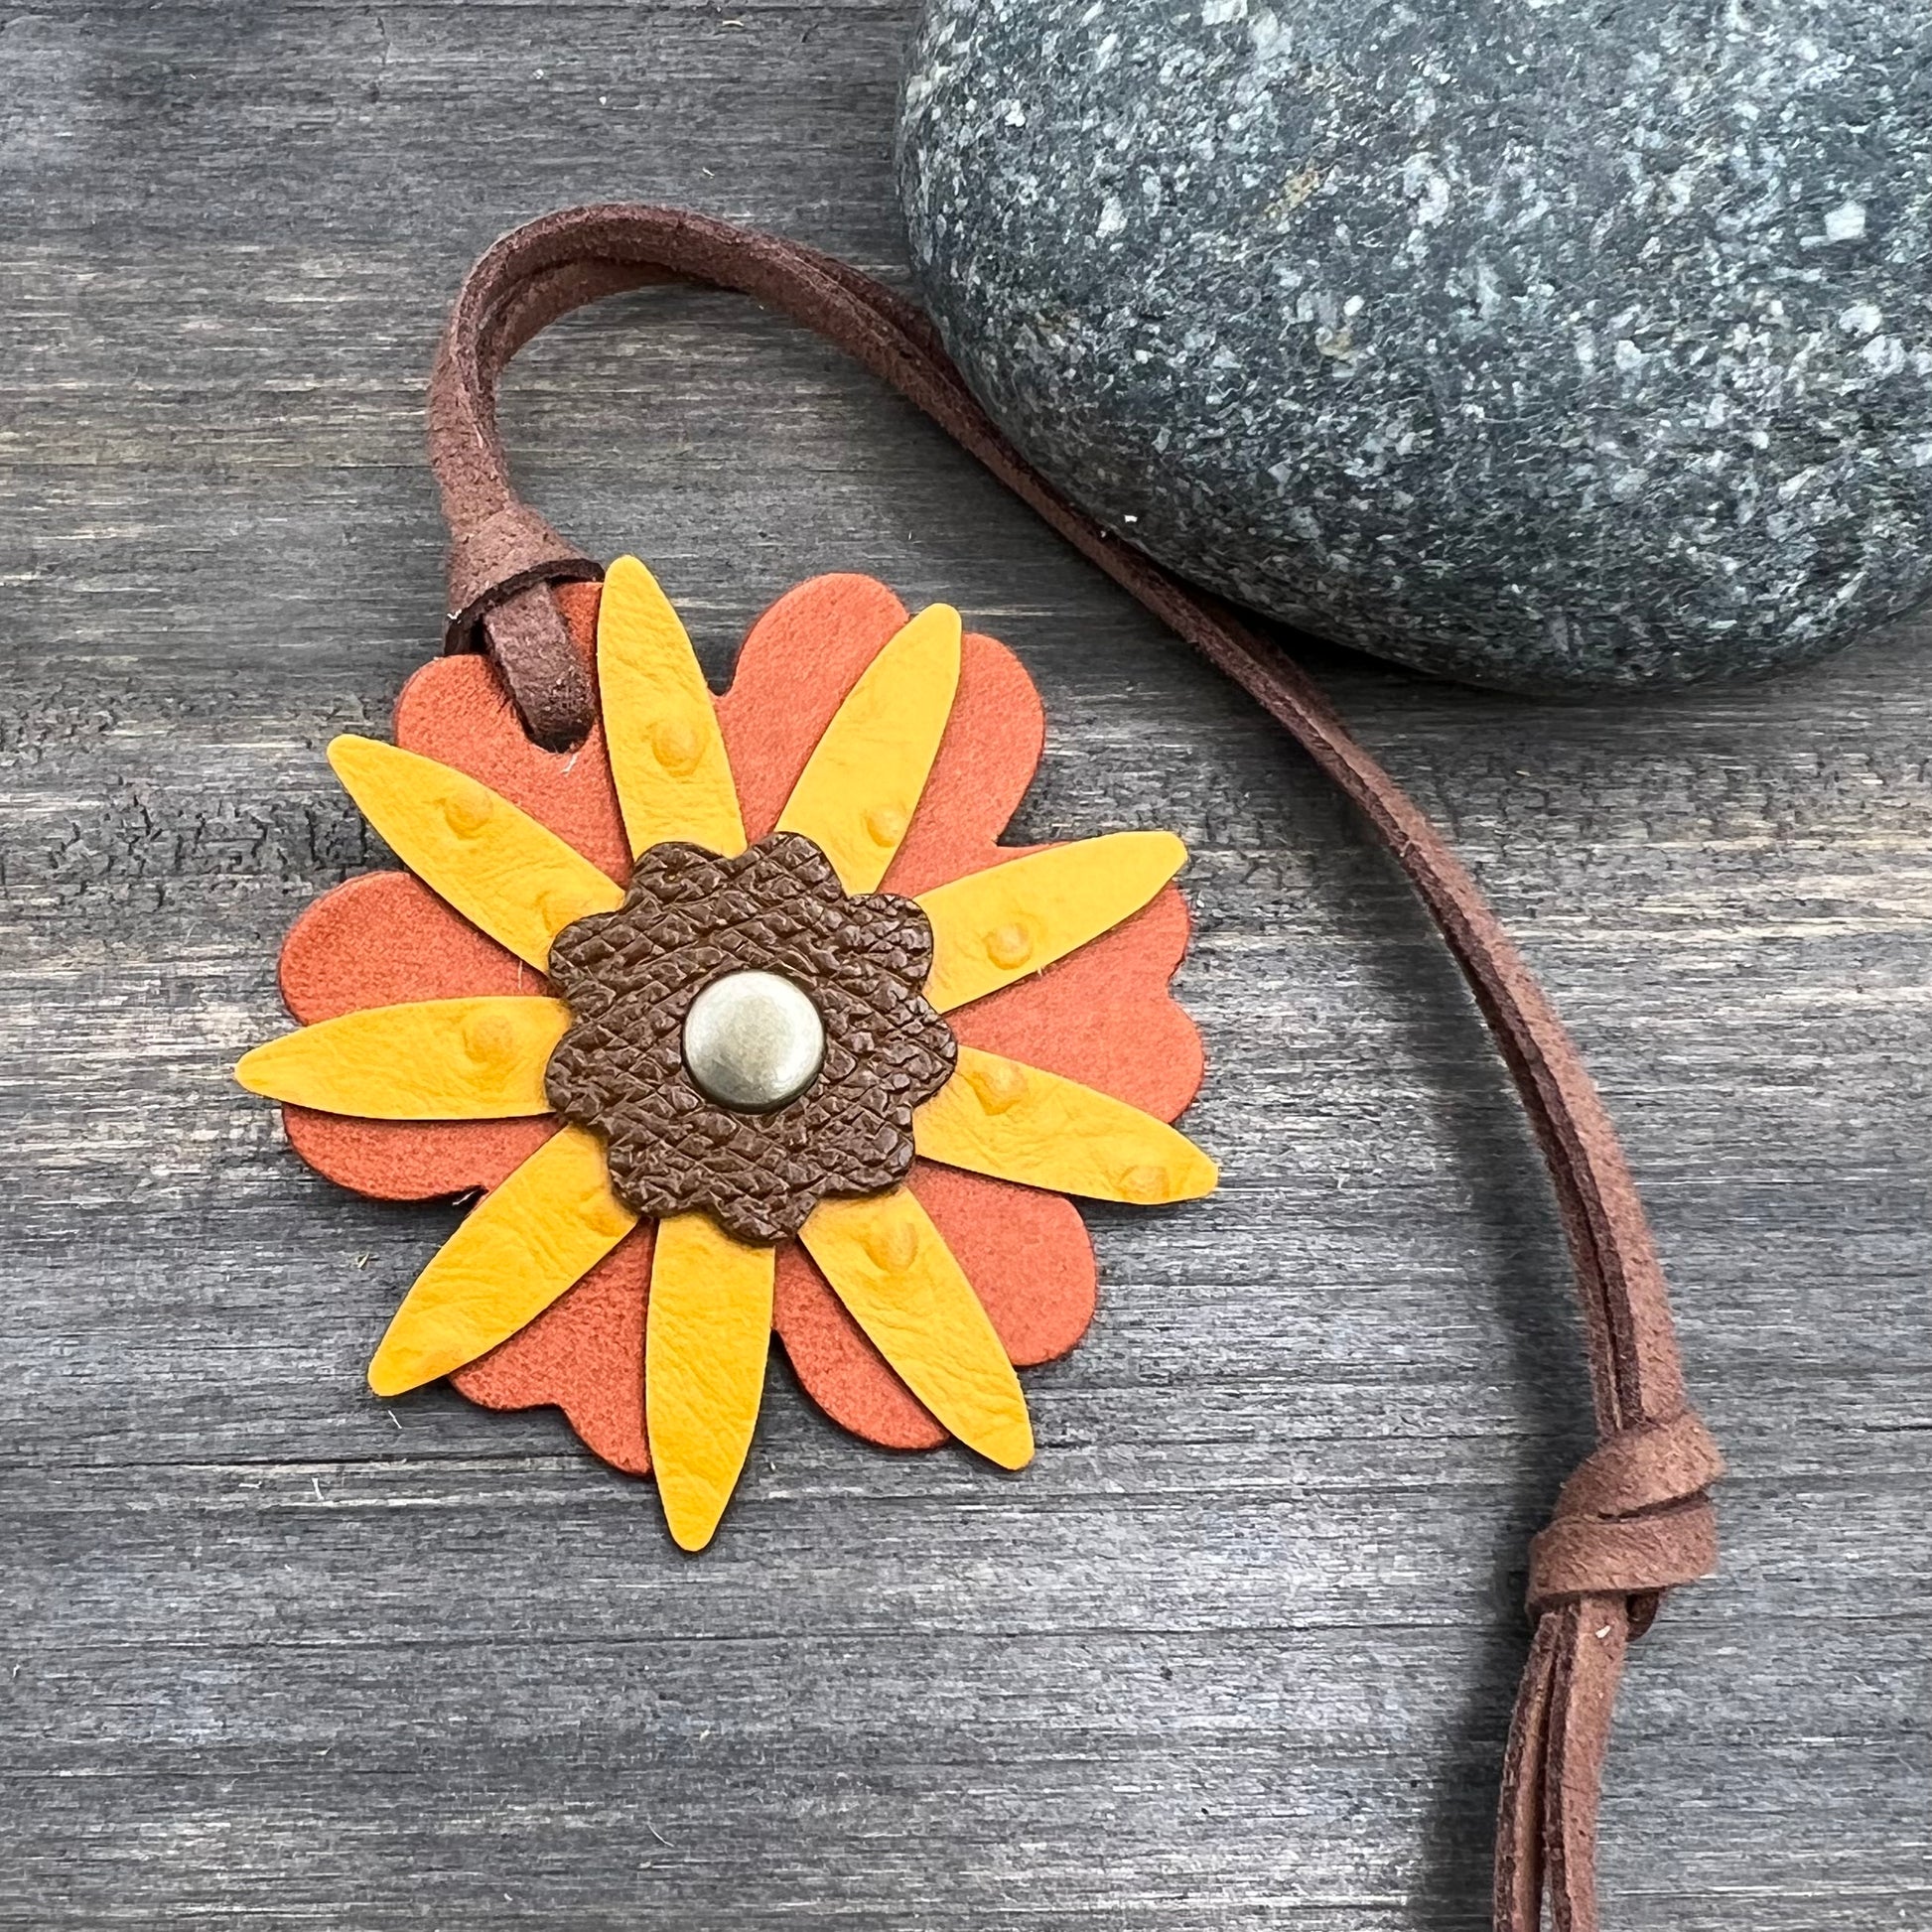 lindsaystreemdesigns Leather Purse Charms - Colorful Flowers